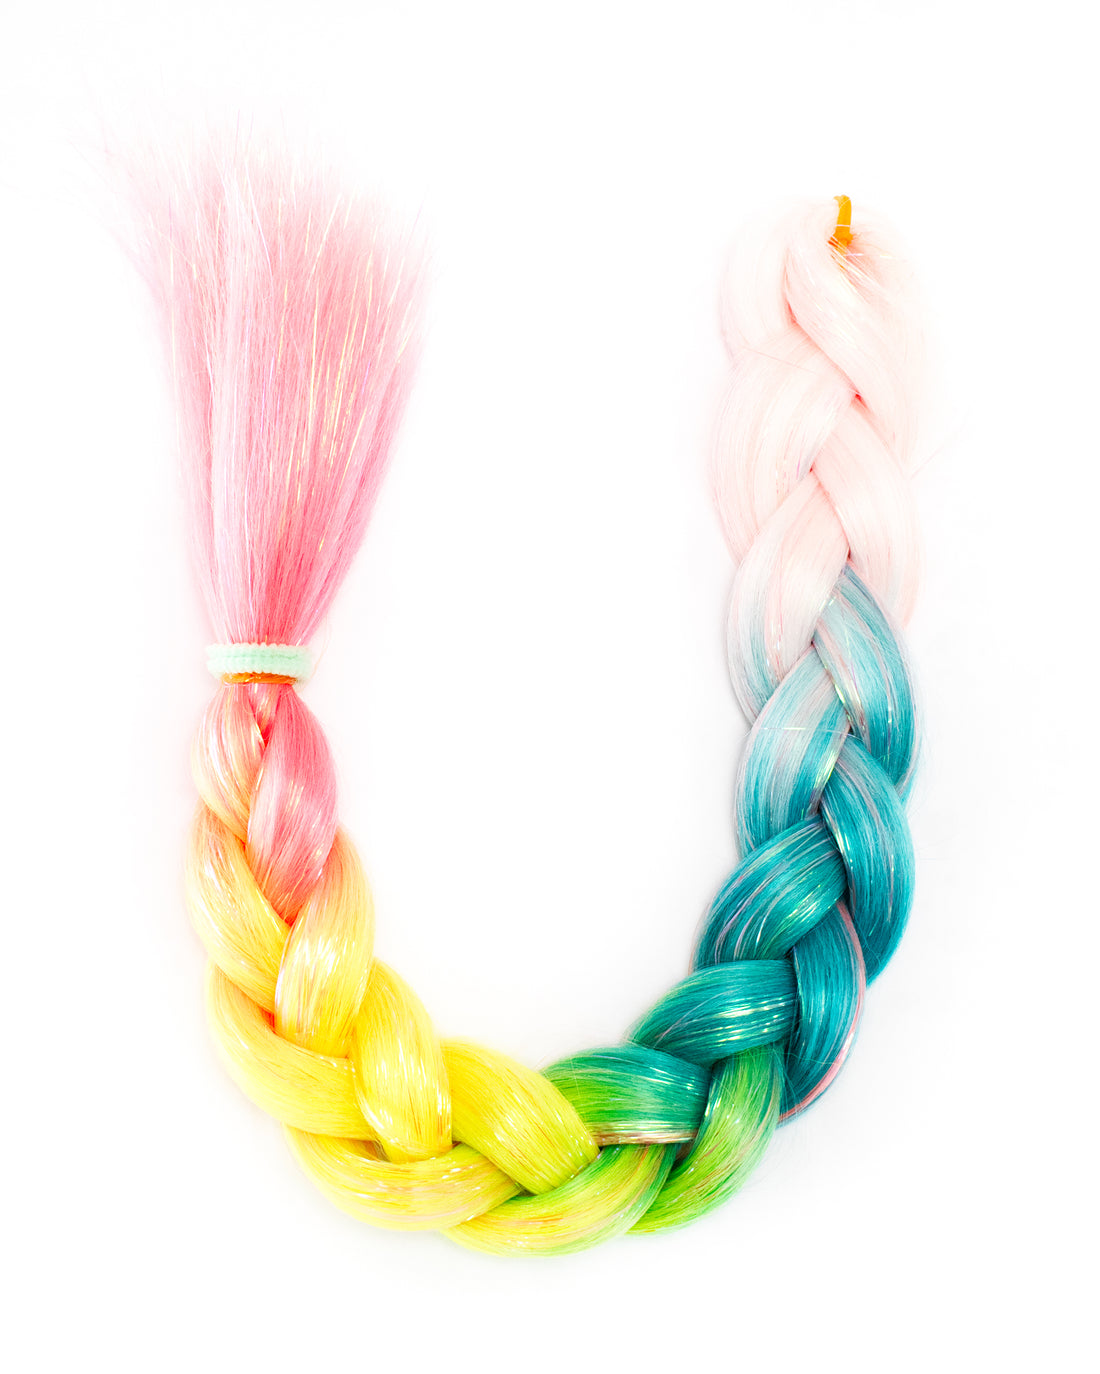 Tropical Delight - Pastel Rainbow Hair Extension with Tinsel - Lunautics Braid-In Hair